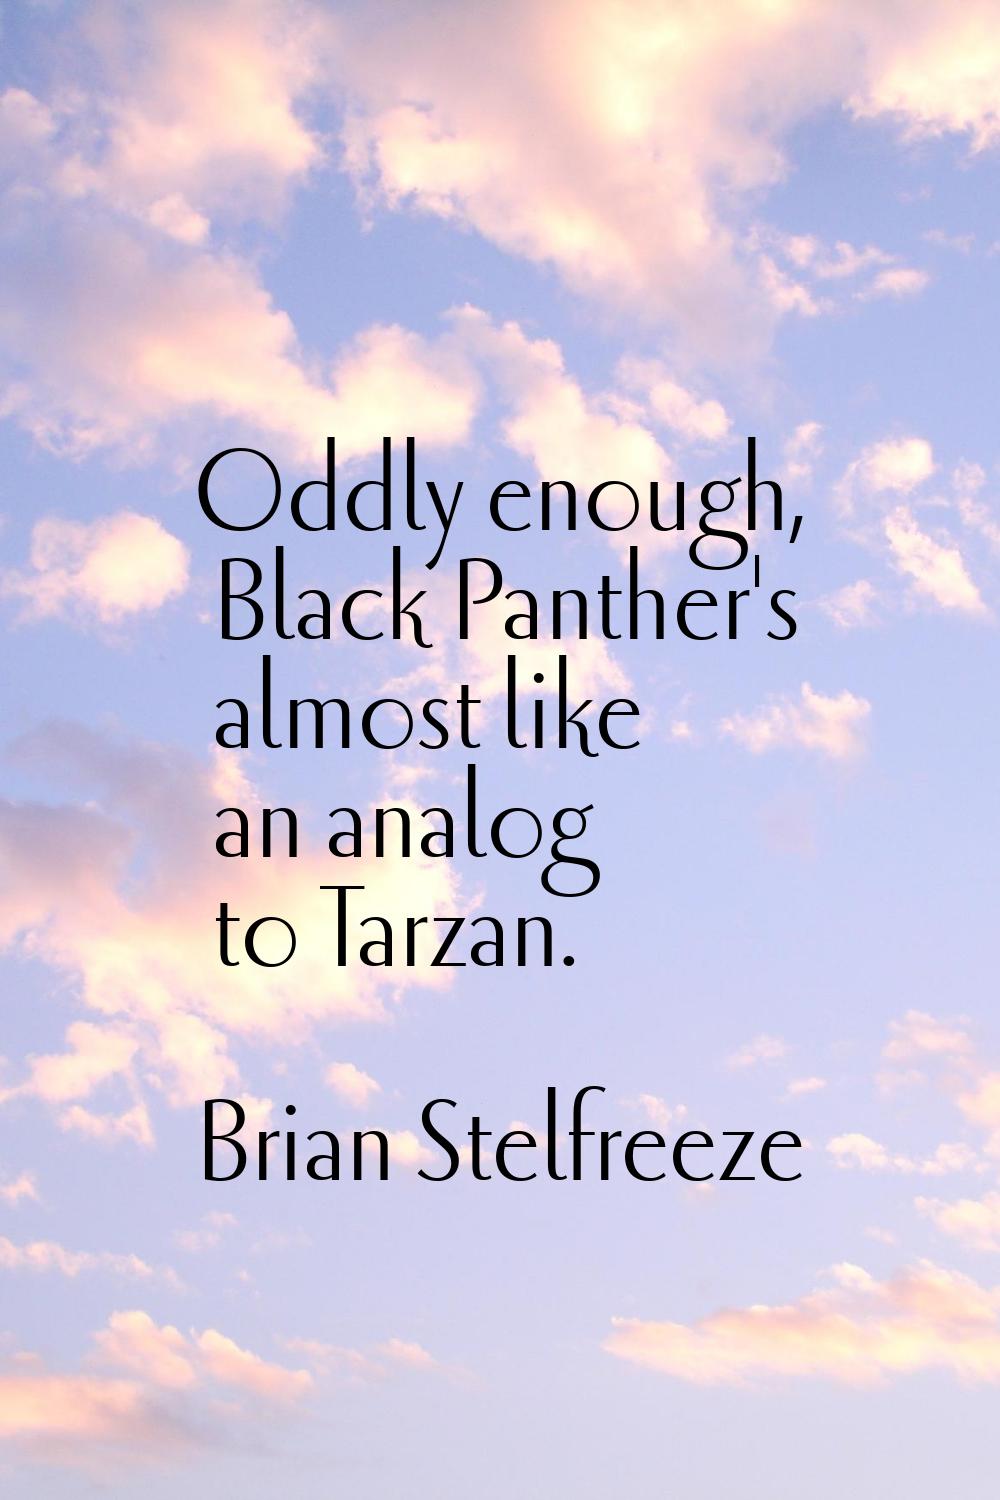 Oddly enough, Black Panther's almost like an analog to Tarzan.